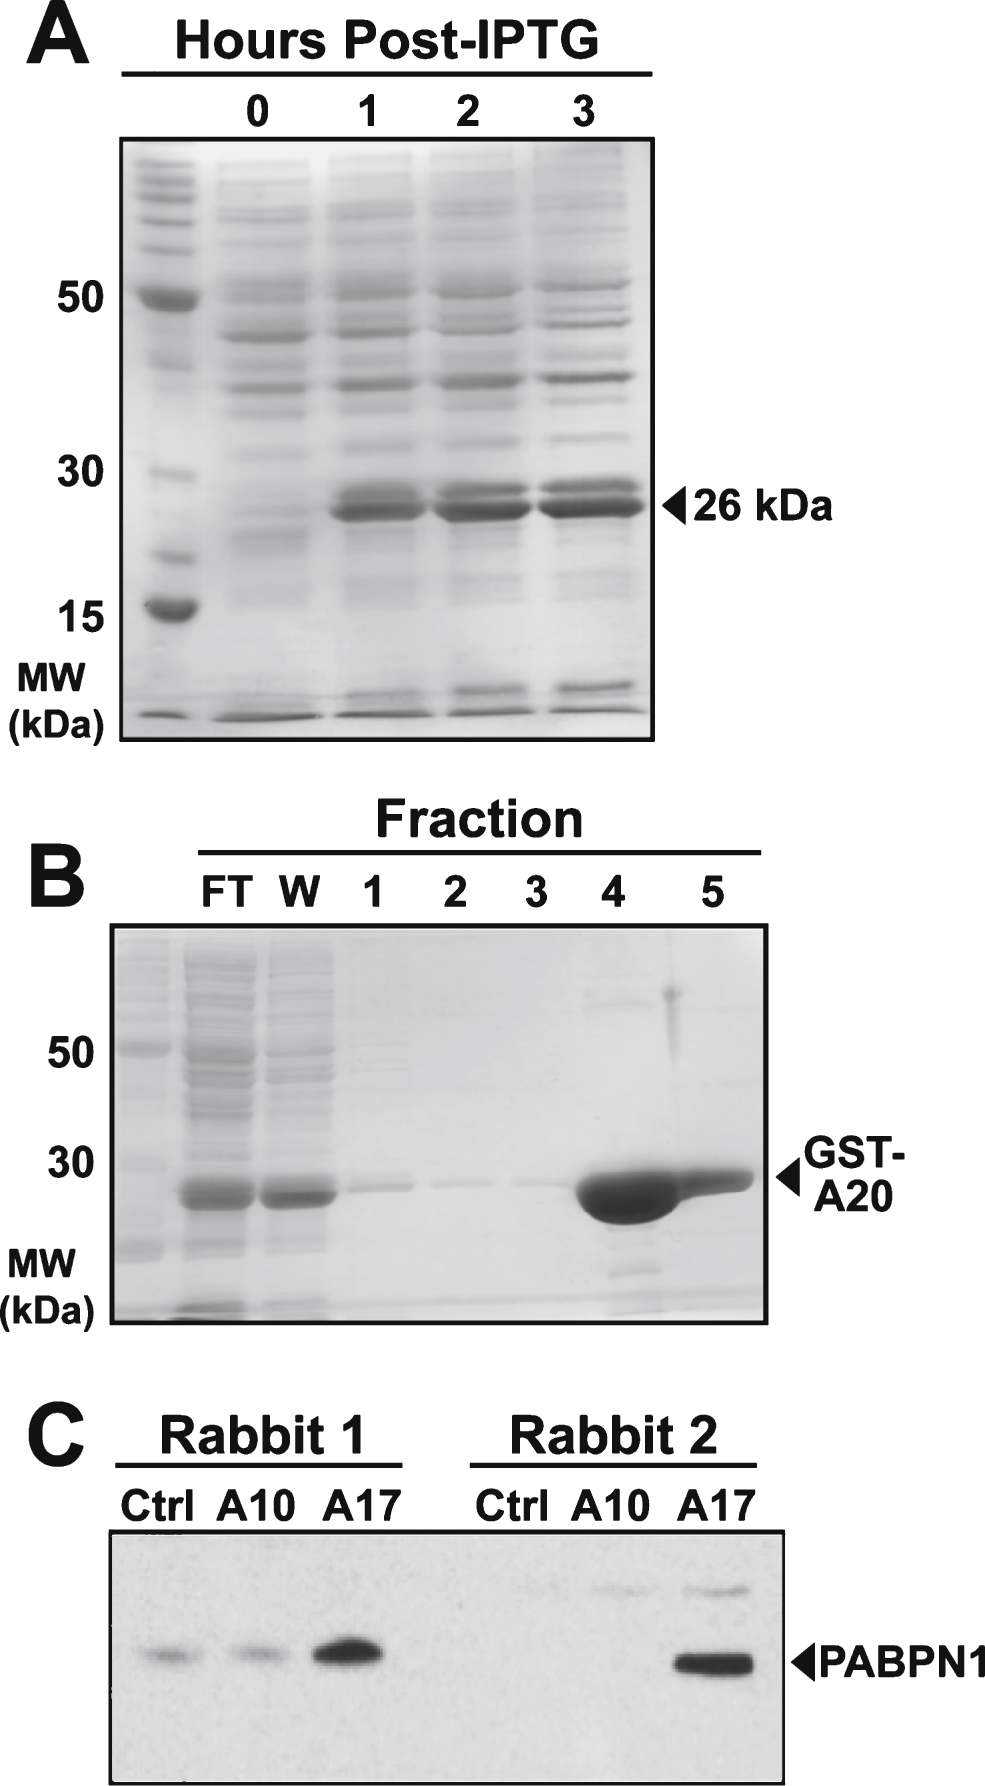 Production and purification of GST-A20 construct and generation of polyclonal antibody. A) Coomassie stained gel of bacterial lysates showing presence of the 26 kDa recombinant GST-A20 construct after inducing expression with IPTG for the indicated number of hours. B) Affinity purification of the GST-A20 construct by fractionation over glutathione sepharose resin and subsequent elution with reduced glutathione. The 26 kDa construct was detected in flow-through (FT) and the wash (W) and the majority was eluted in Fractions 4 and 5. C) Immunoblot of 50 μg of lysates from HEK 293 cells transfected with empty plasmid (Ctrl) or plasmid encoding wild type (A10) and alanine-expanded (A17) PABPN1 probed with sera from immunized rabbits. PABPN1 protein was detected as a 50 kDa band as indicated [19].